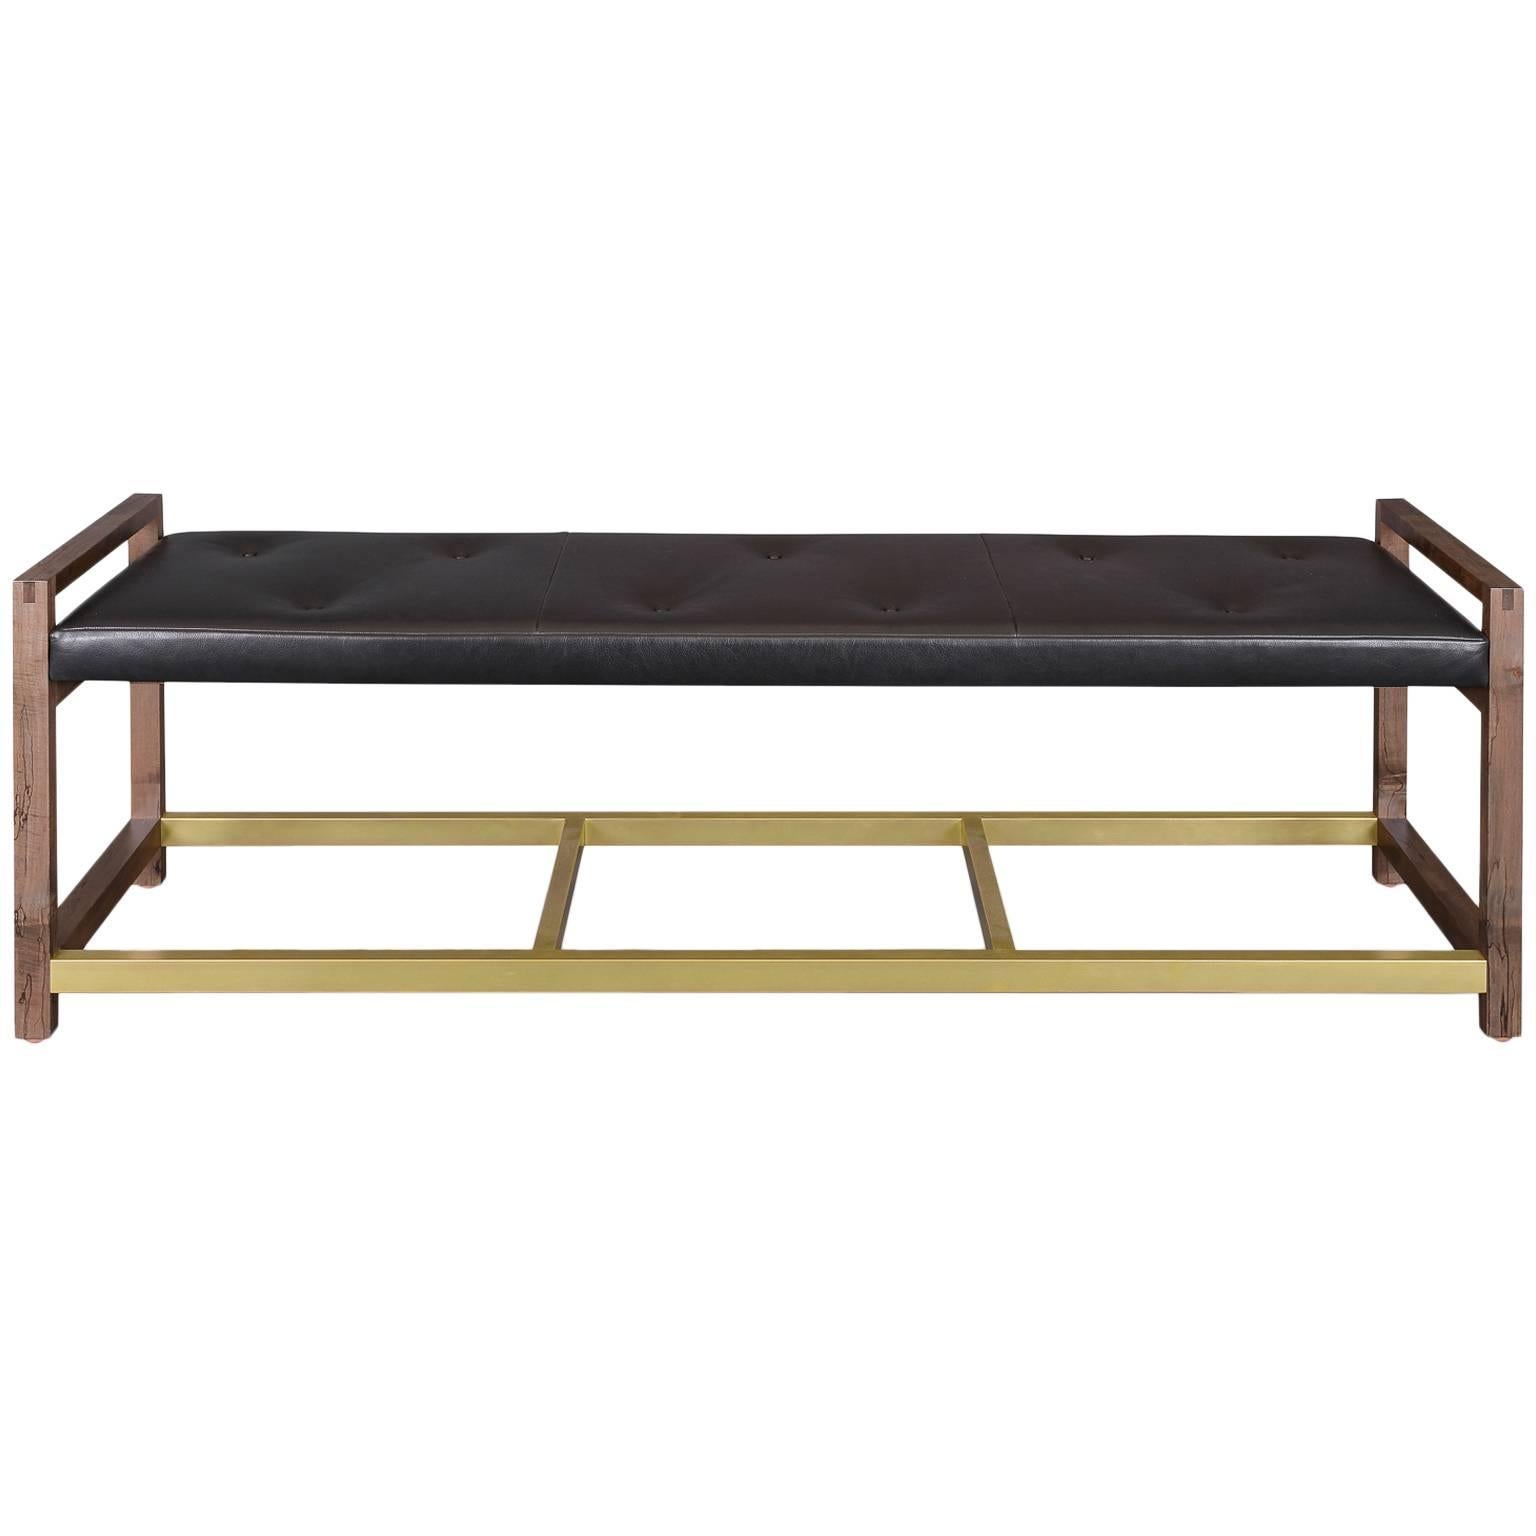 Gotham Bench - Customizable Wood, Metal and Material